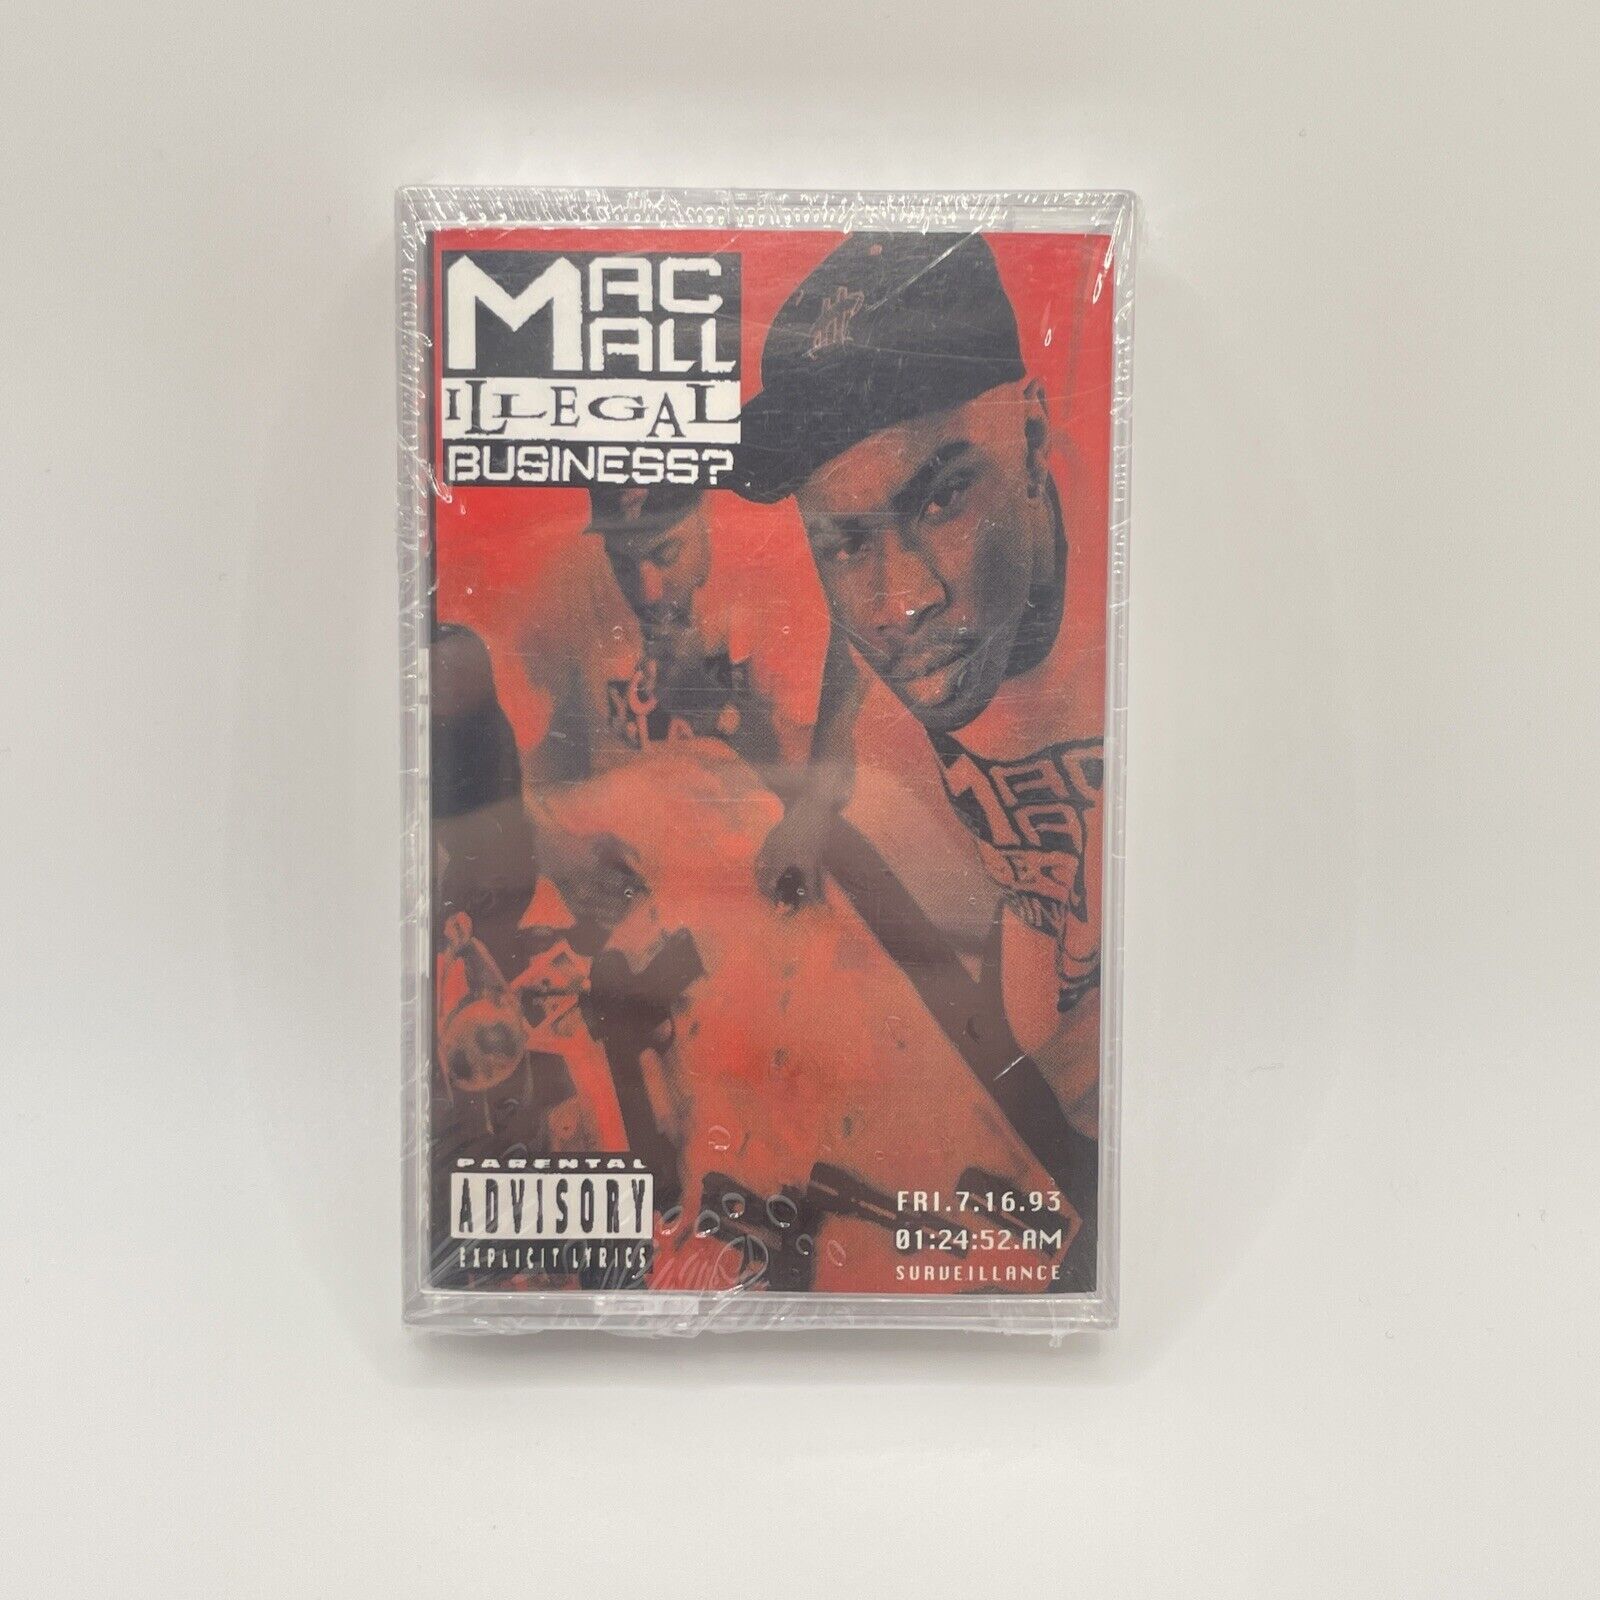 Illegal Business? by Mac Mall NEW Sealed 1993 Classic Bay Area Rap Cassette Tape